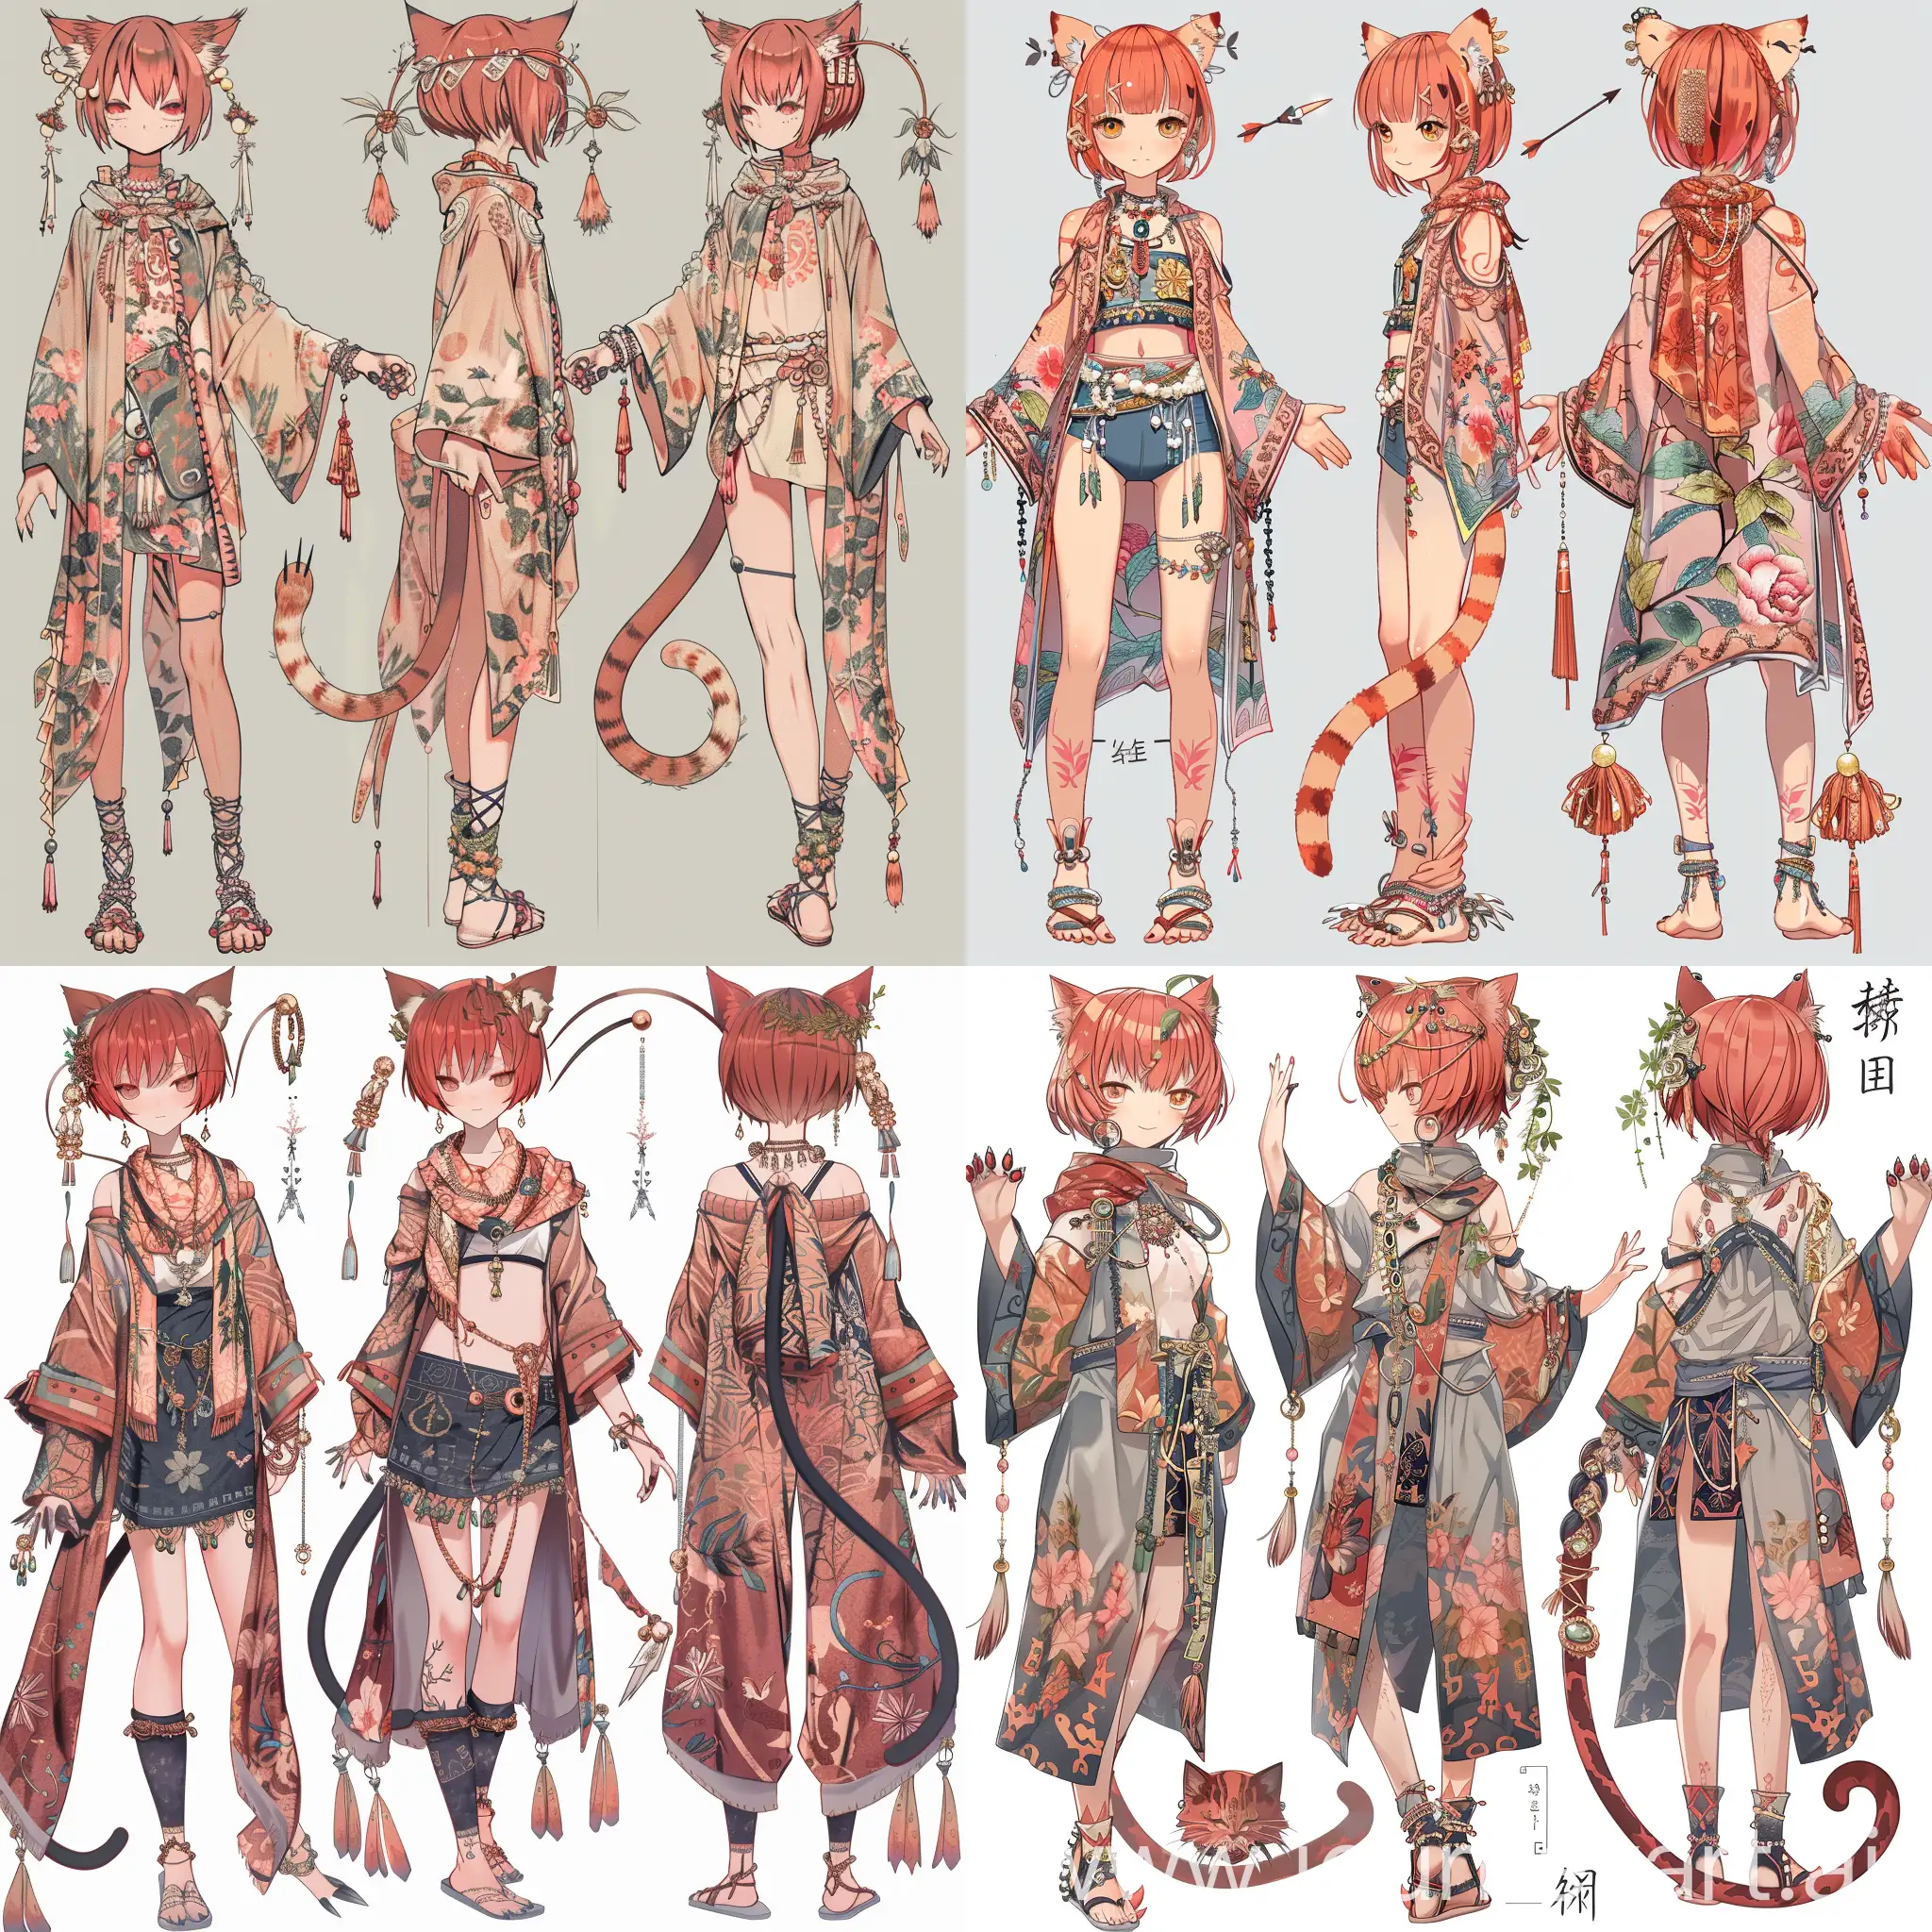 girl in anime style, with short hair, arrow haircut, crimson hair, oriental baggy clothes, herbarium on clothes, scarf with peach patterns, a lot of jewelry on long ears, long tail with a tassel and rings on the tail, legs, cat paws, claws on the hands, Multiple views, full height.